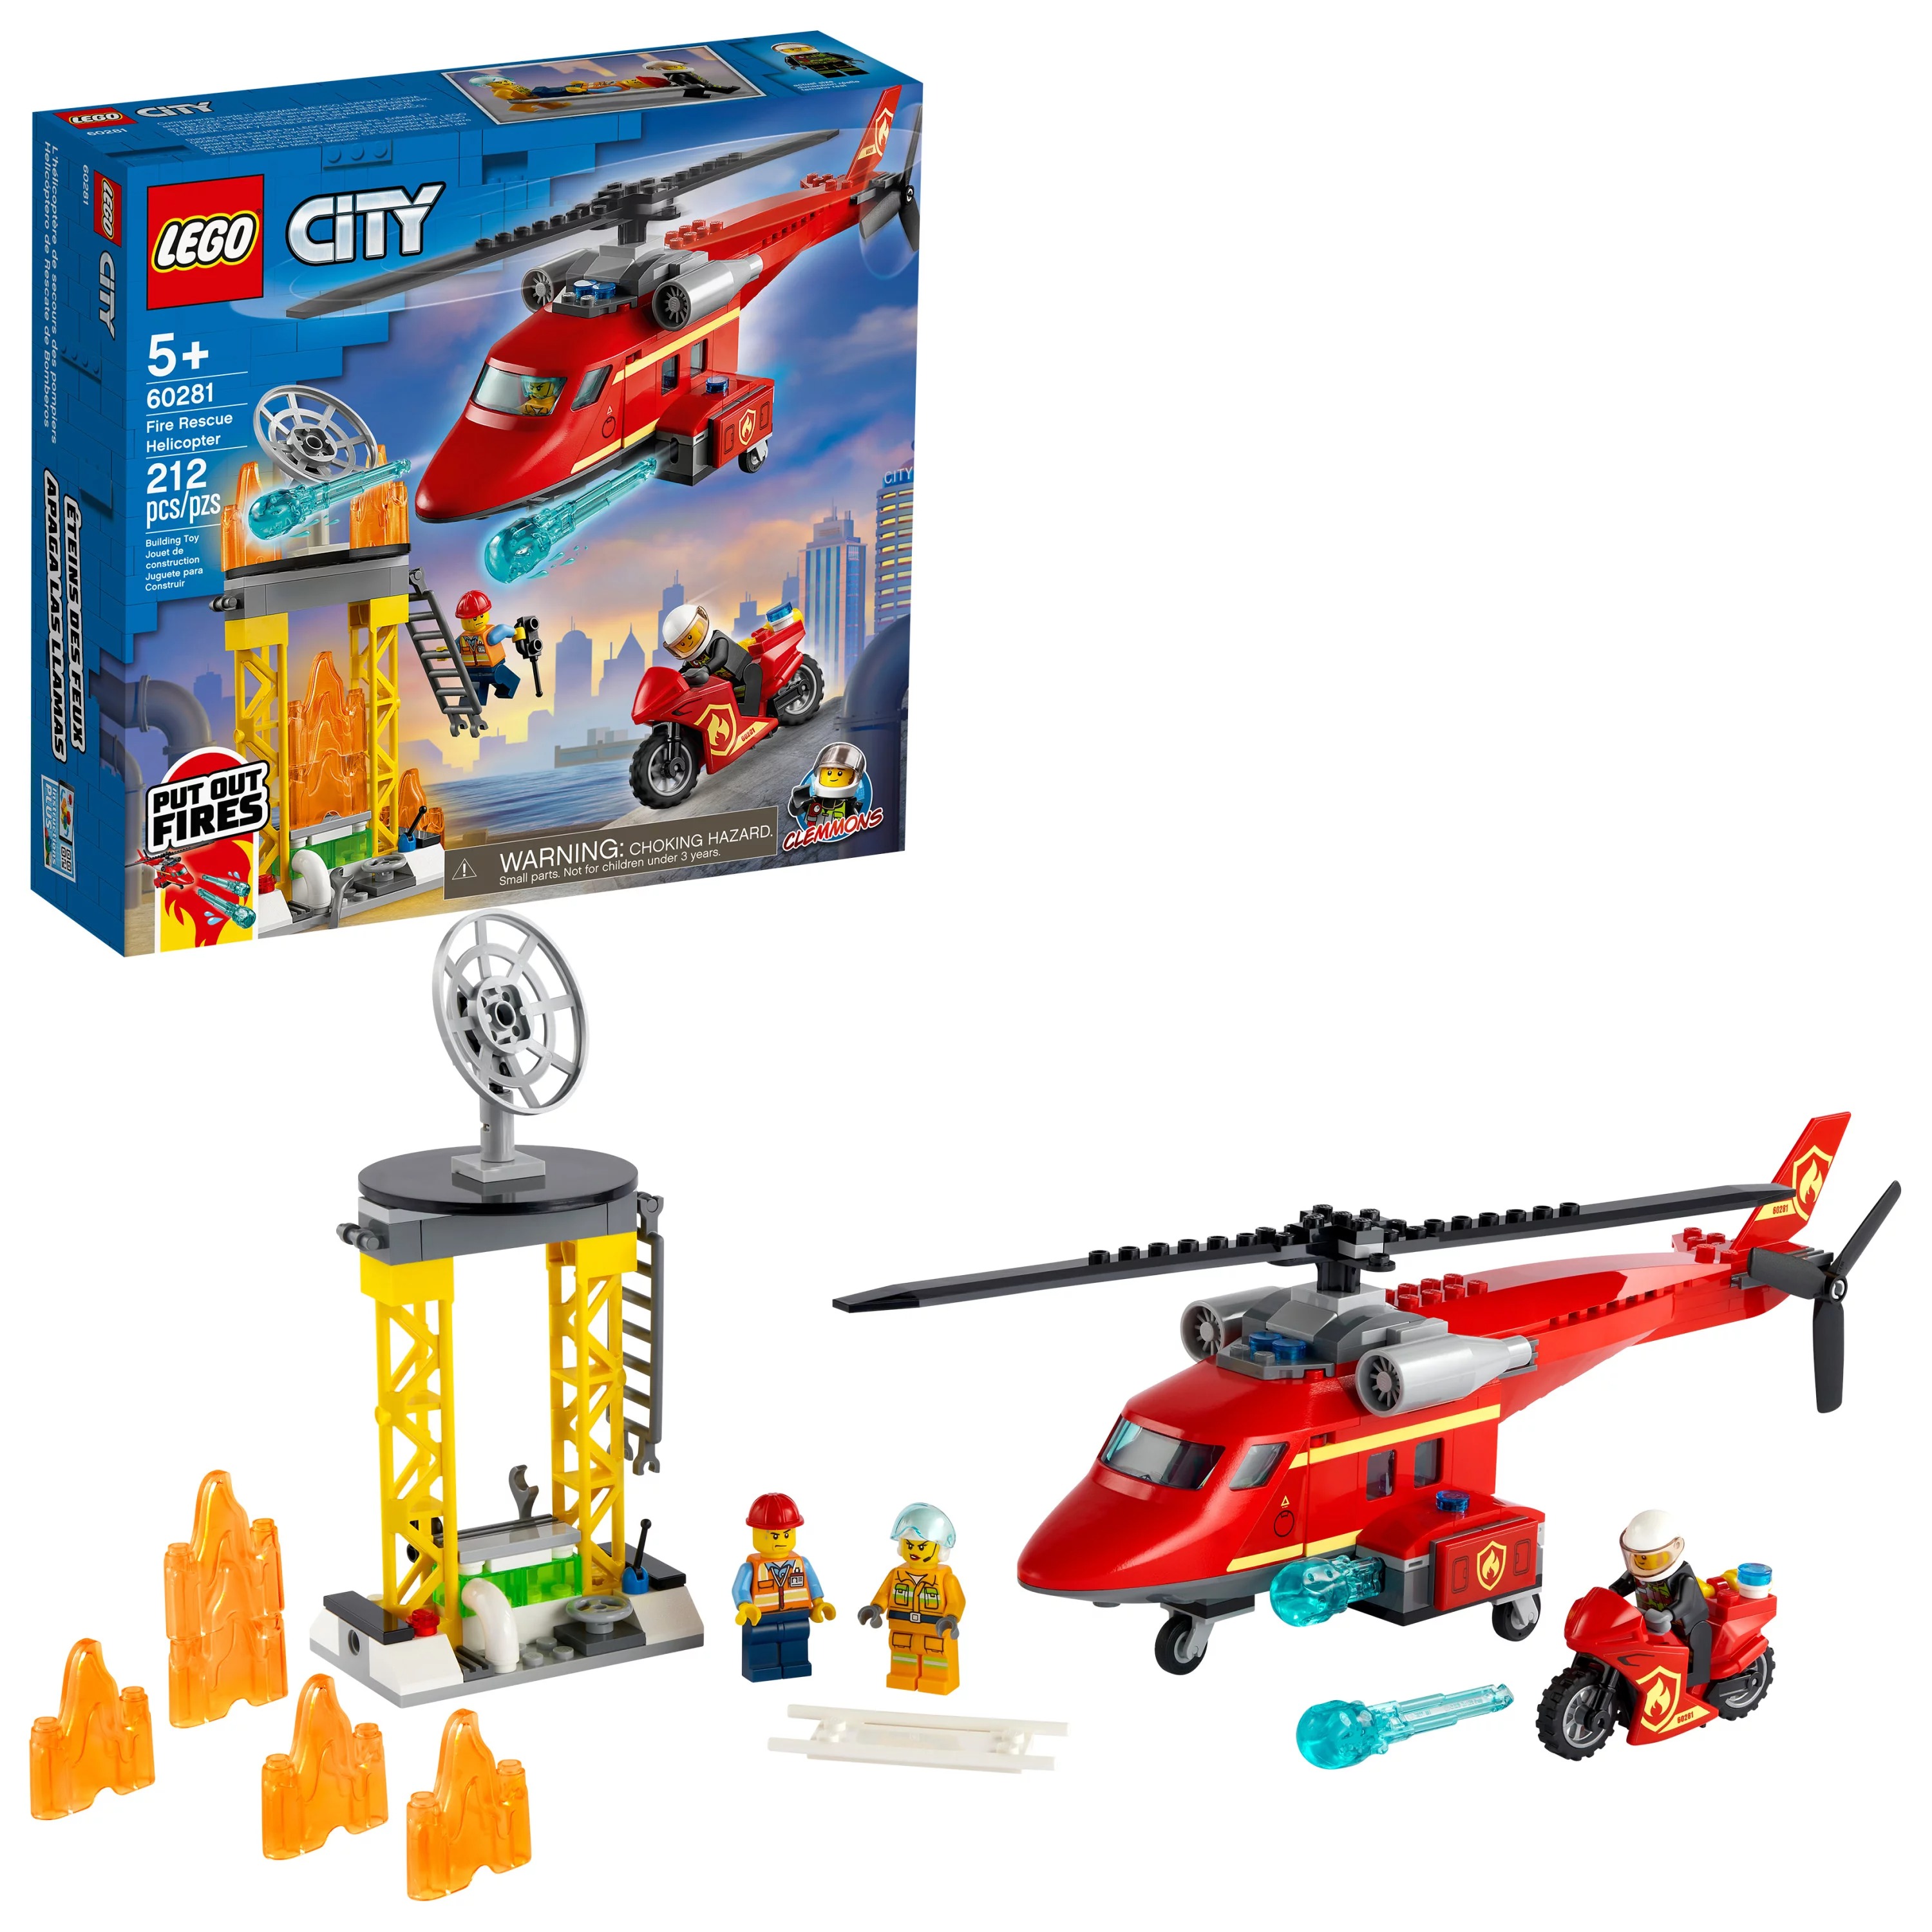 LEGO City Fire Rescue Helicopter 60281 Firefighter Building Toy and Playset for Kids (212 Pieces)